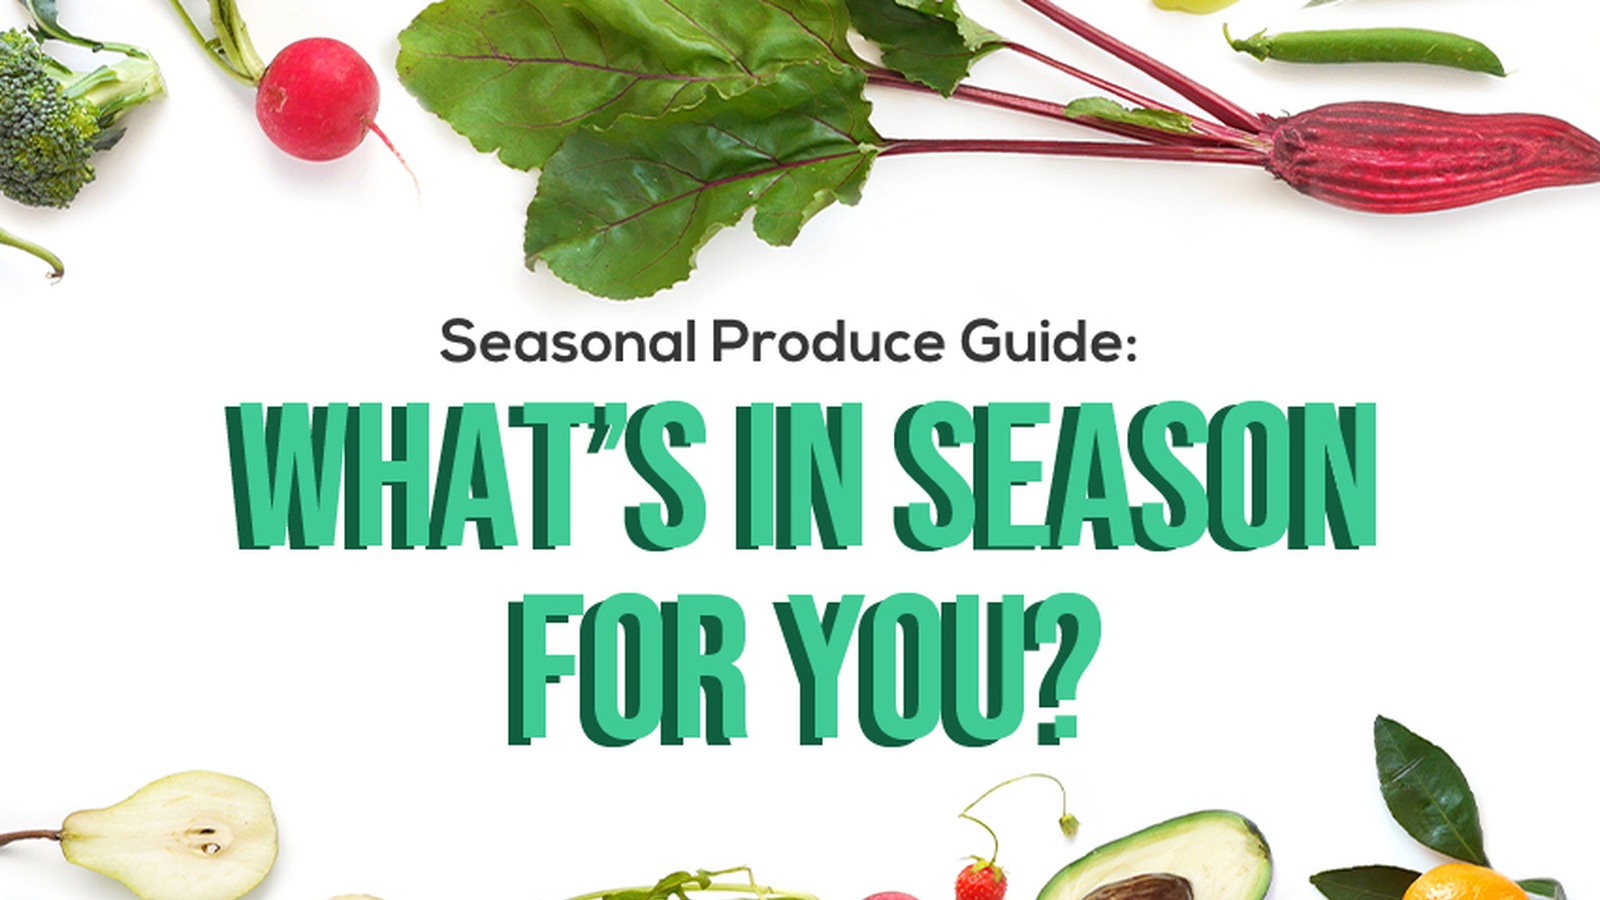 Seasonal Produce Guide: What's In Season for You?